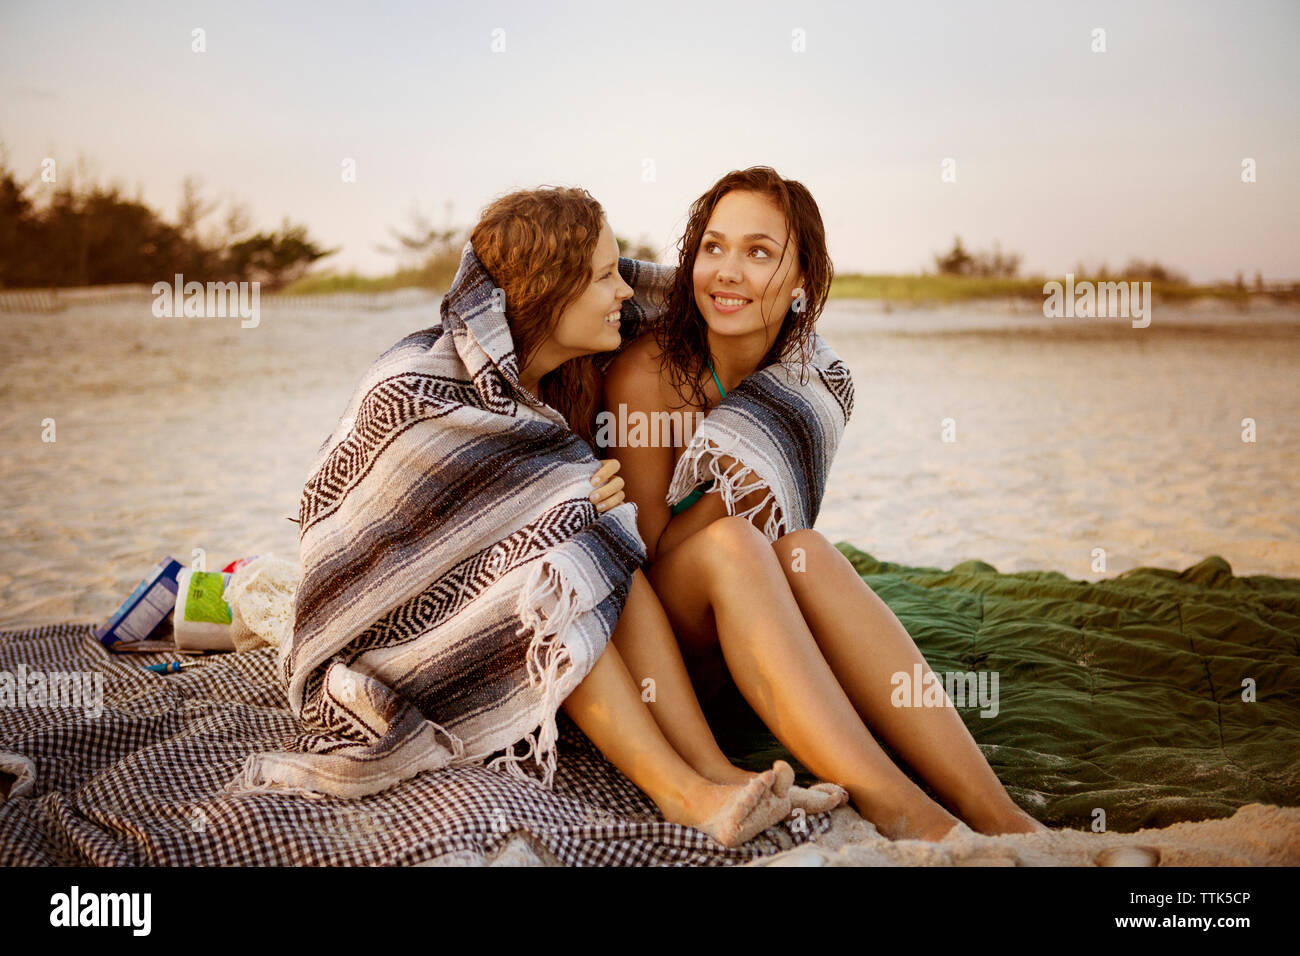 Smiling women wrapped in blanket sitting at beach Stock Photo